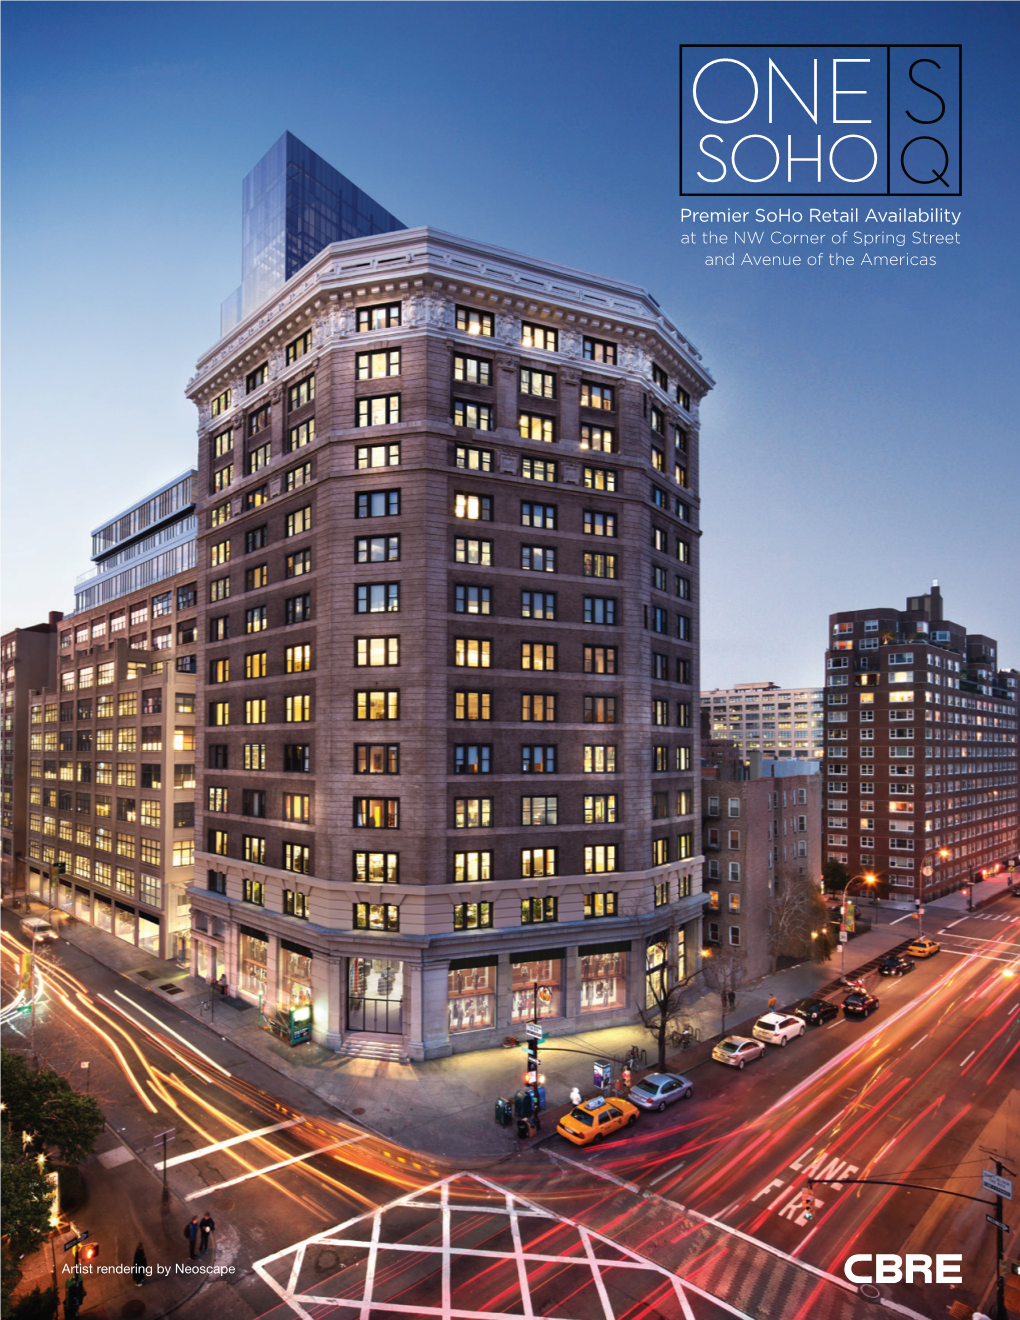 Premier Soho Retail Availability at the NW Corner of Spring Street and Avenue of the Americas